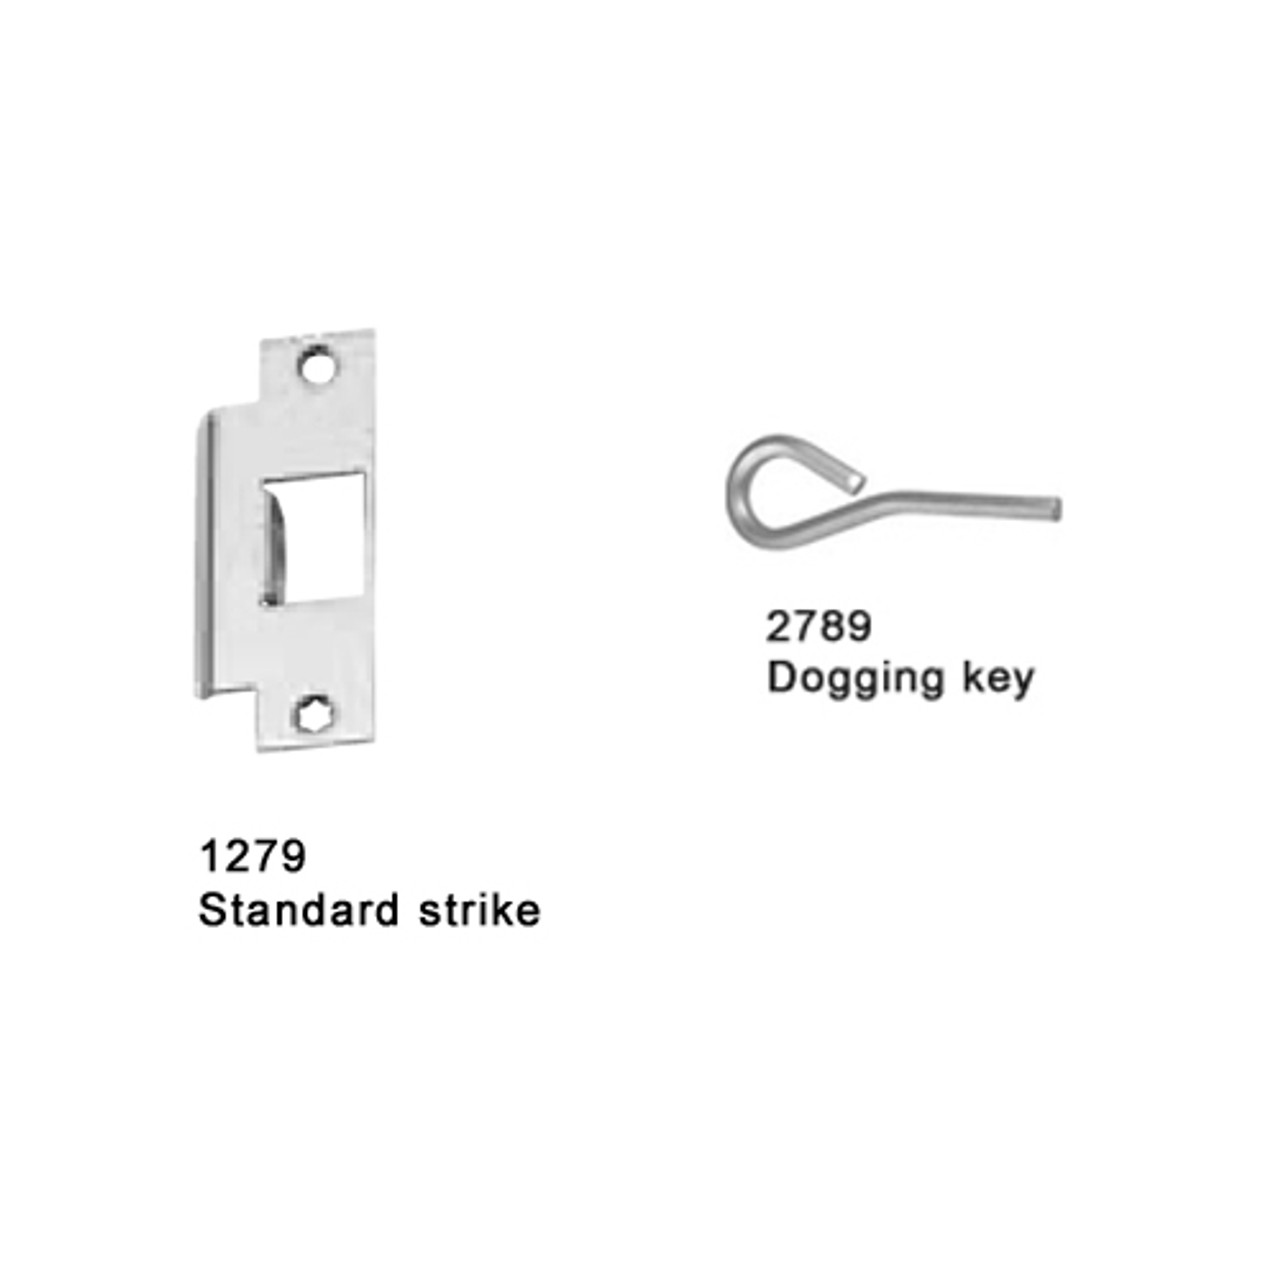 25-M-L-DANE-US32-3-LHR Falcon 25 Series Mortise Lock Devices with 510L Dane Lever Trim in Polished Stainless Steel